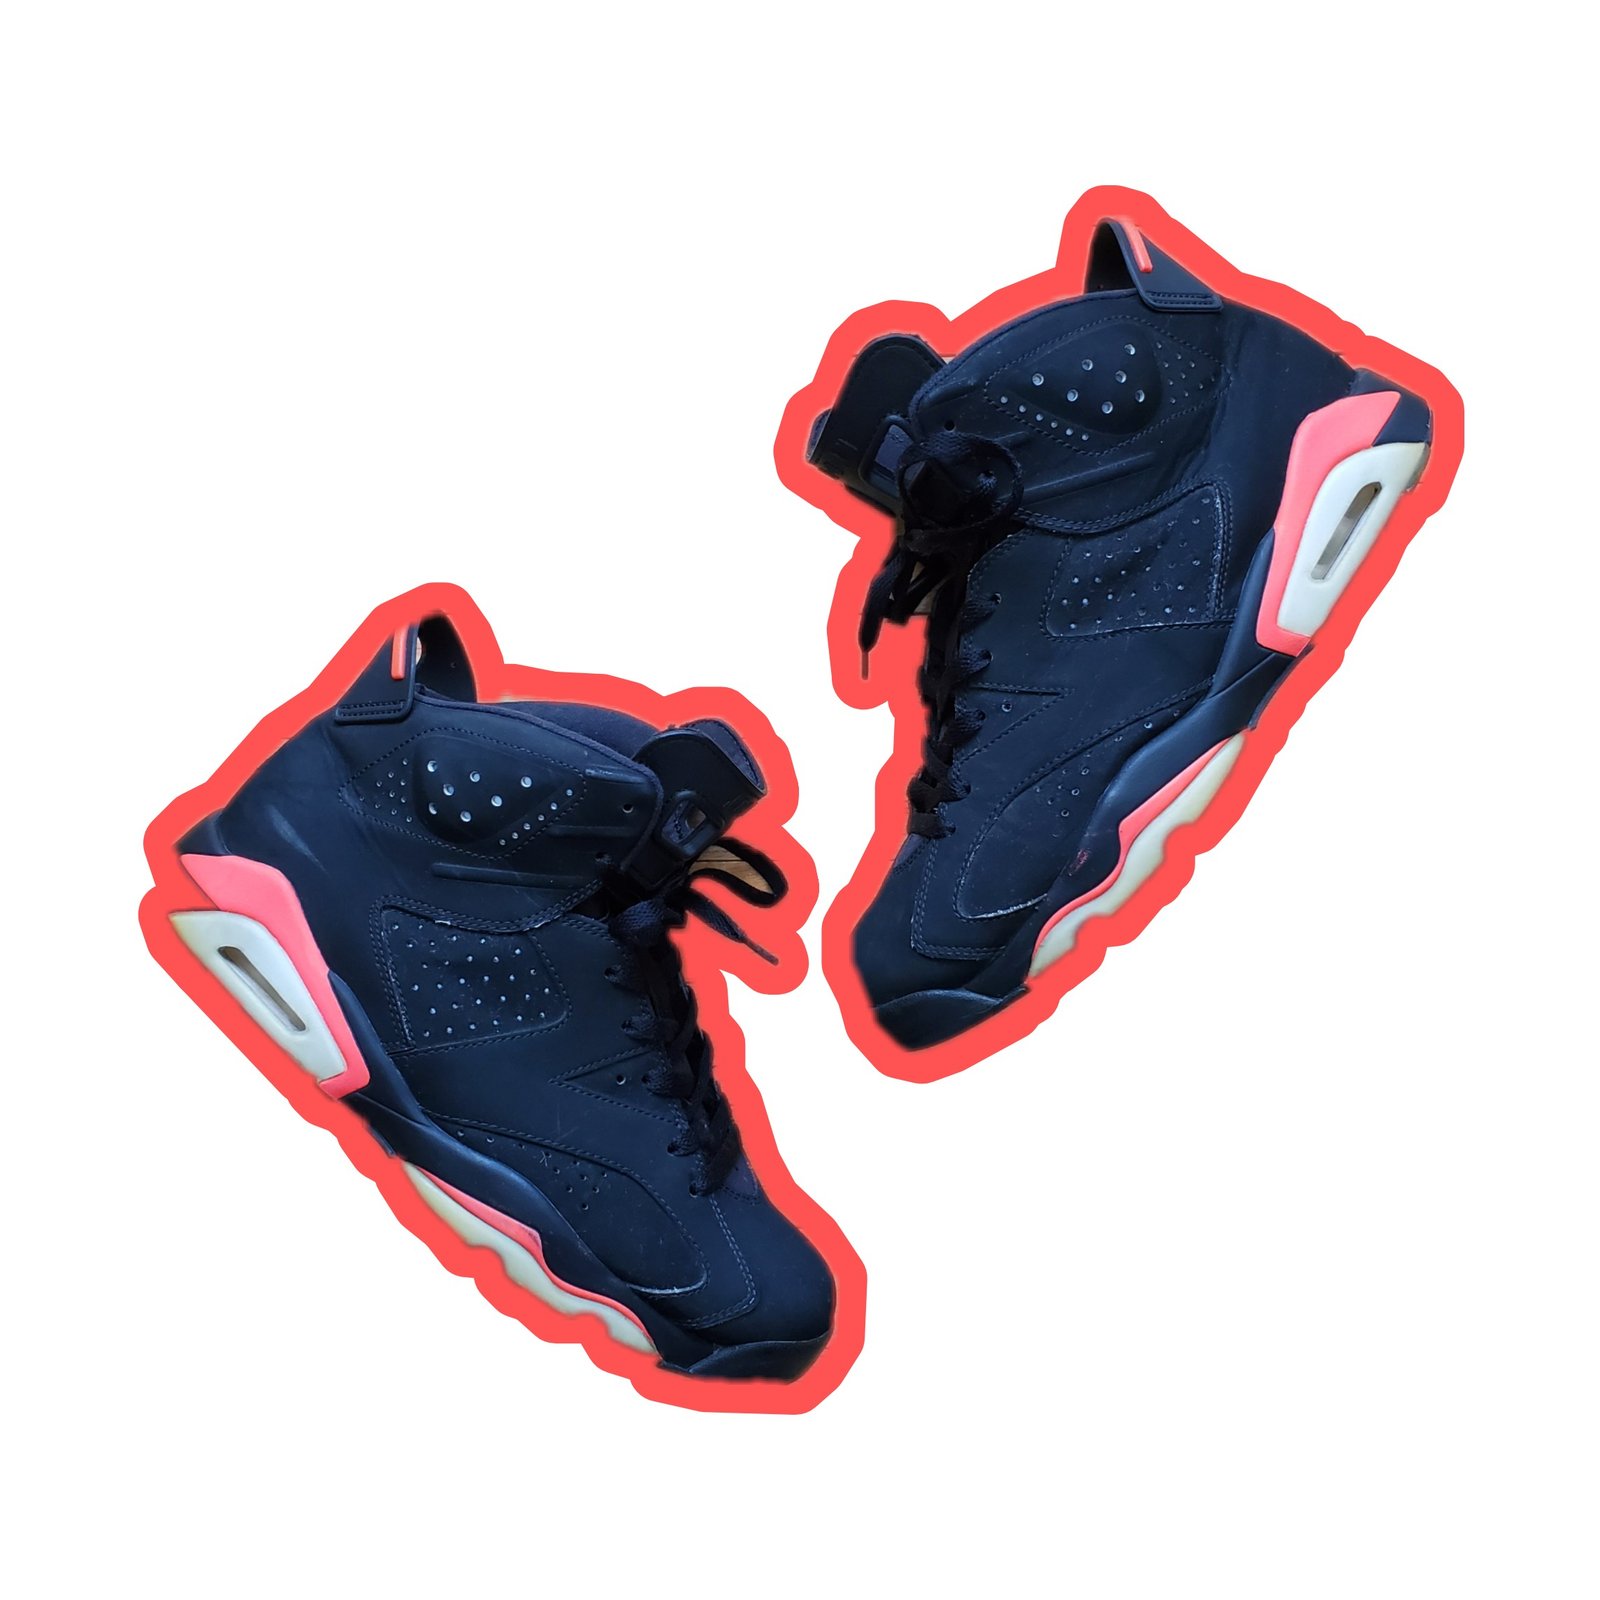 jordan 6 infrared sold out